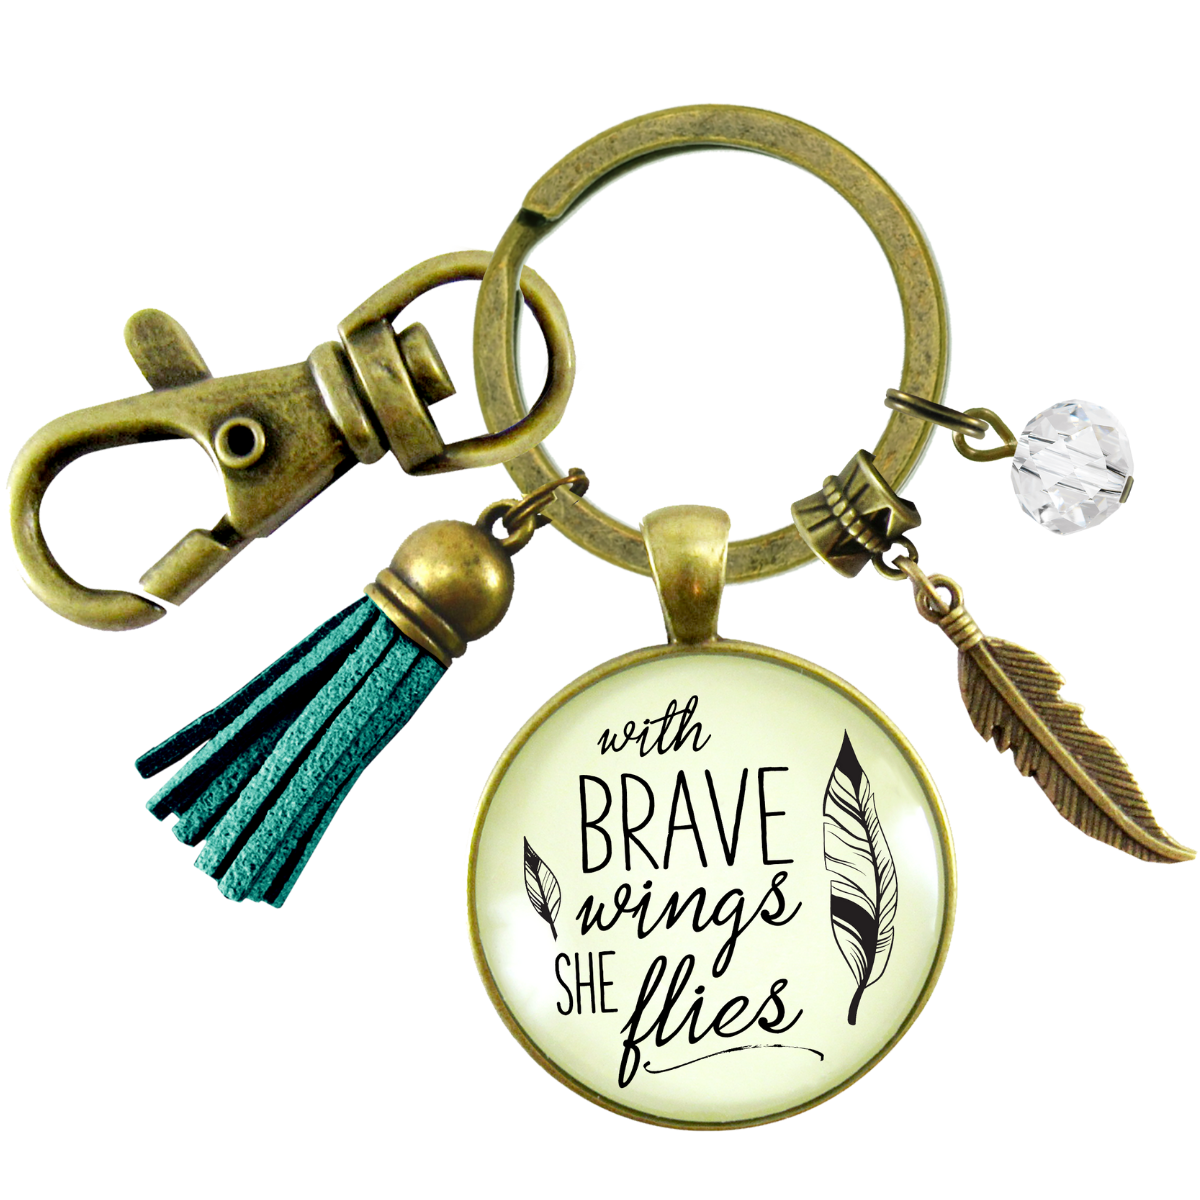 Brave Jewelry With Wings She Flies Style Blue Tassel Keychain For Women Motivational Gift - Gutsy Goodness;Brave Jewelry With Wings She Flies Style Blue Tassel Keychain For Women Motivational Gift - Gutsy Goodness Handmade Jewelry Gifts